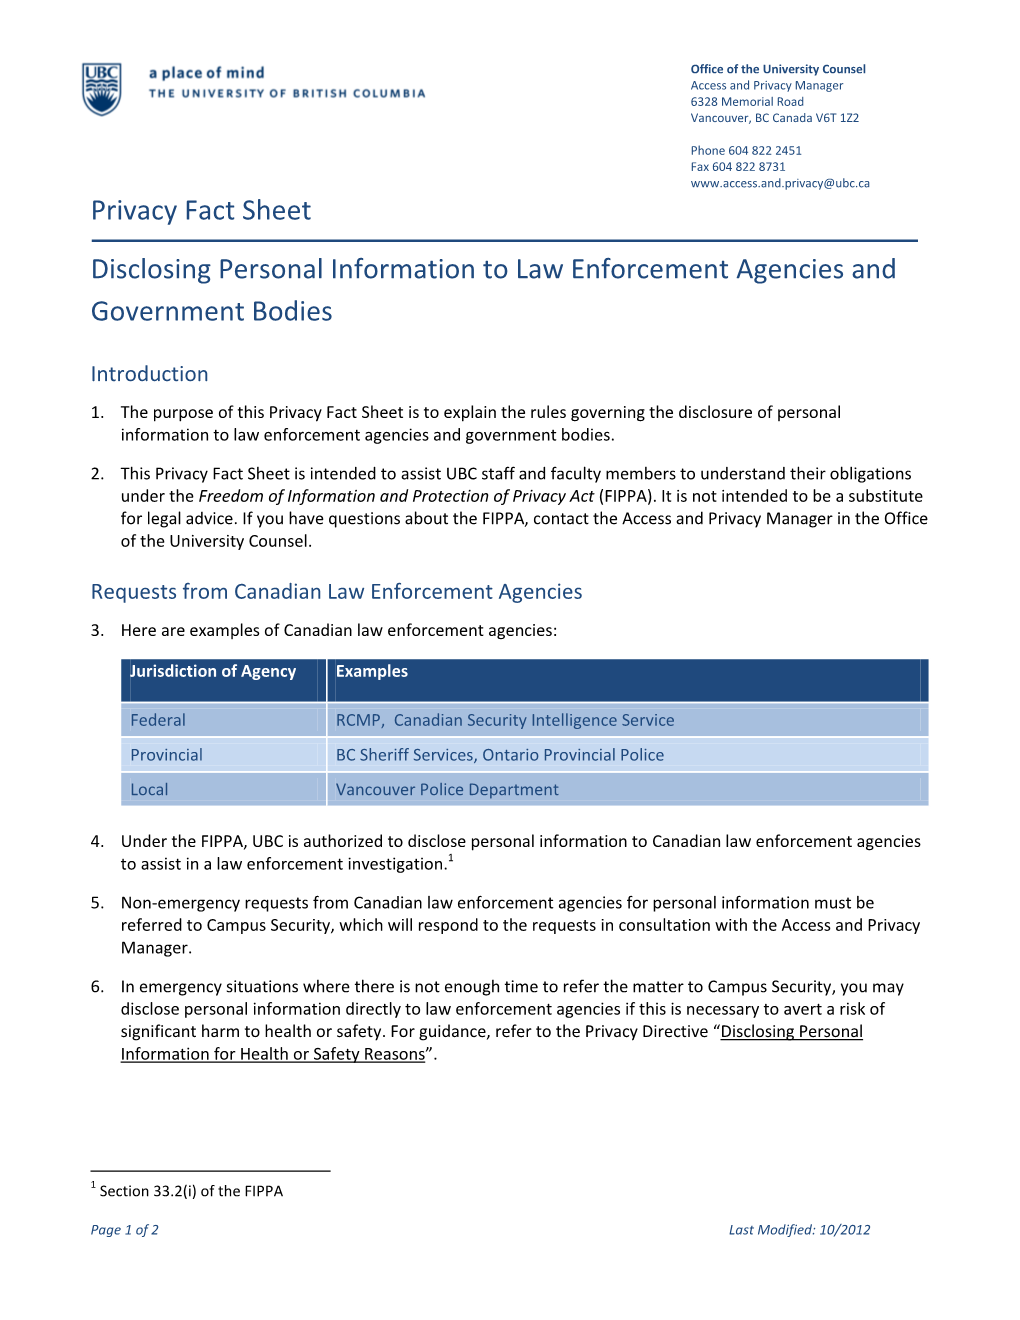 Privacy Fact Sheet Disclosing Personal Information to Law Enforcement Agencies and Government Bodies